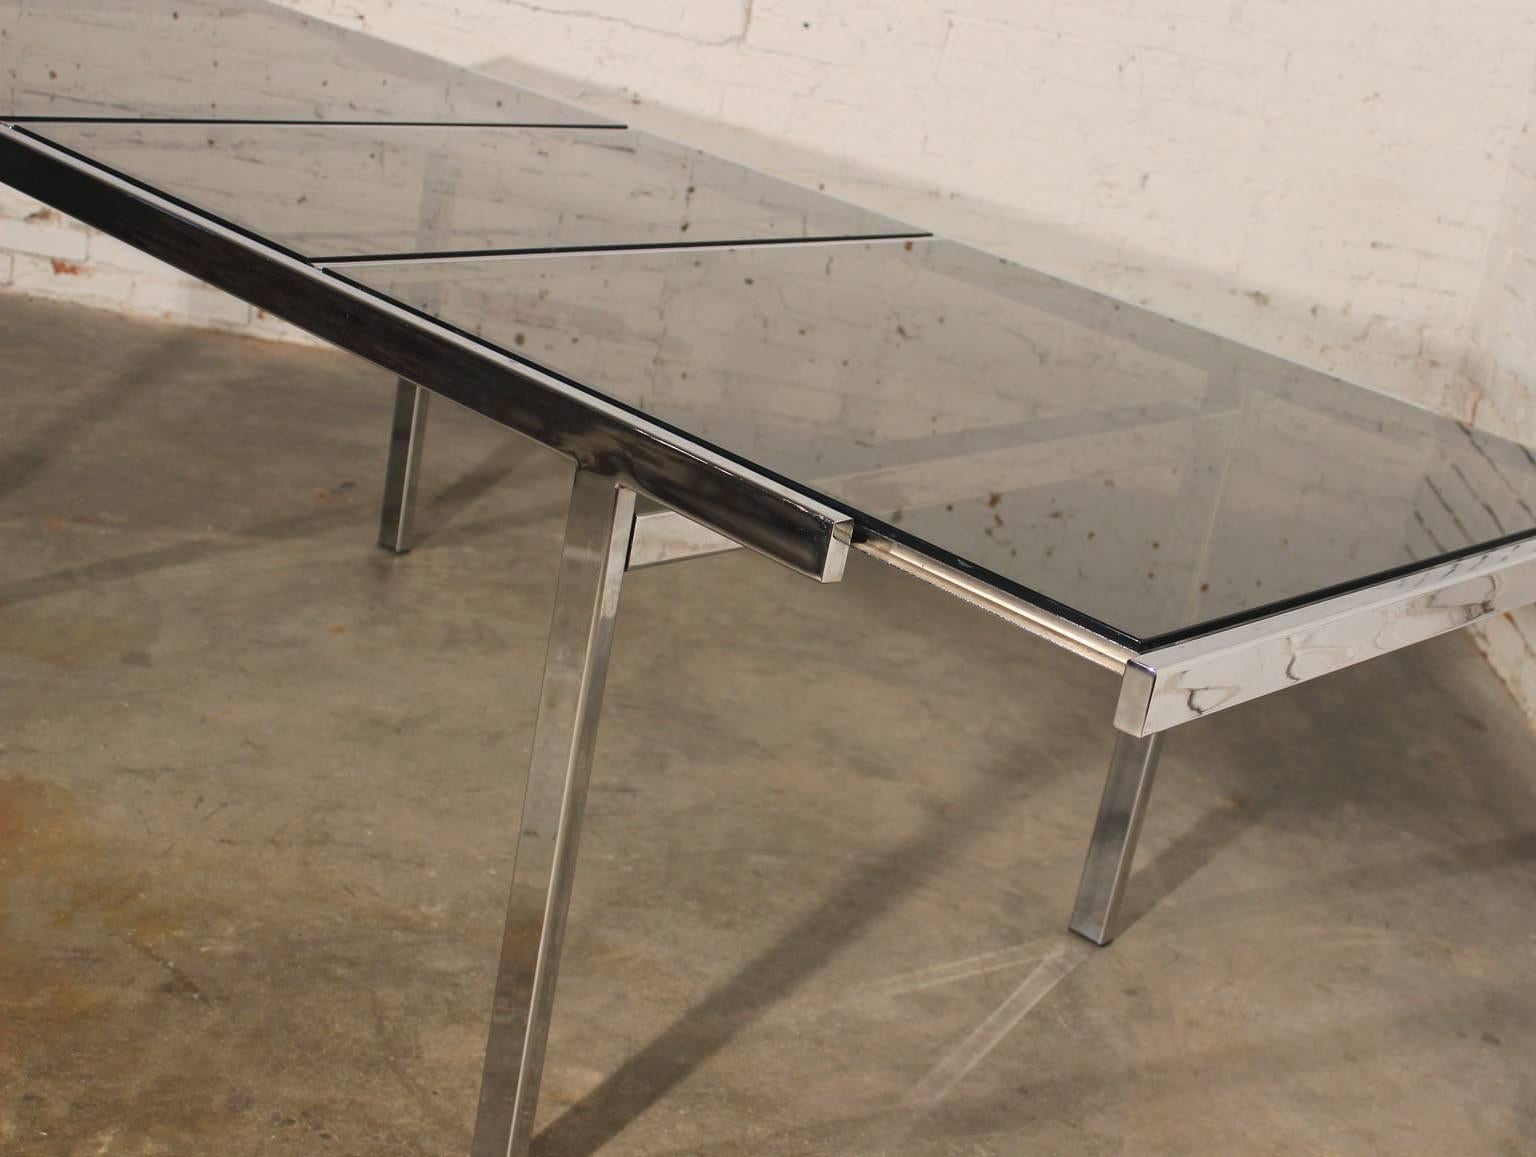 Quite the innovative design in this vintage Milo Baughman expandable dining table! A kind of modern refractory table. The chrome and smoked glass is just a wonderful combination and closed this is a fabulous example of modern streamlined design.